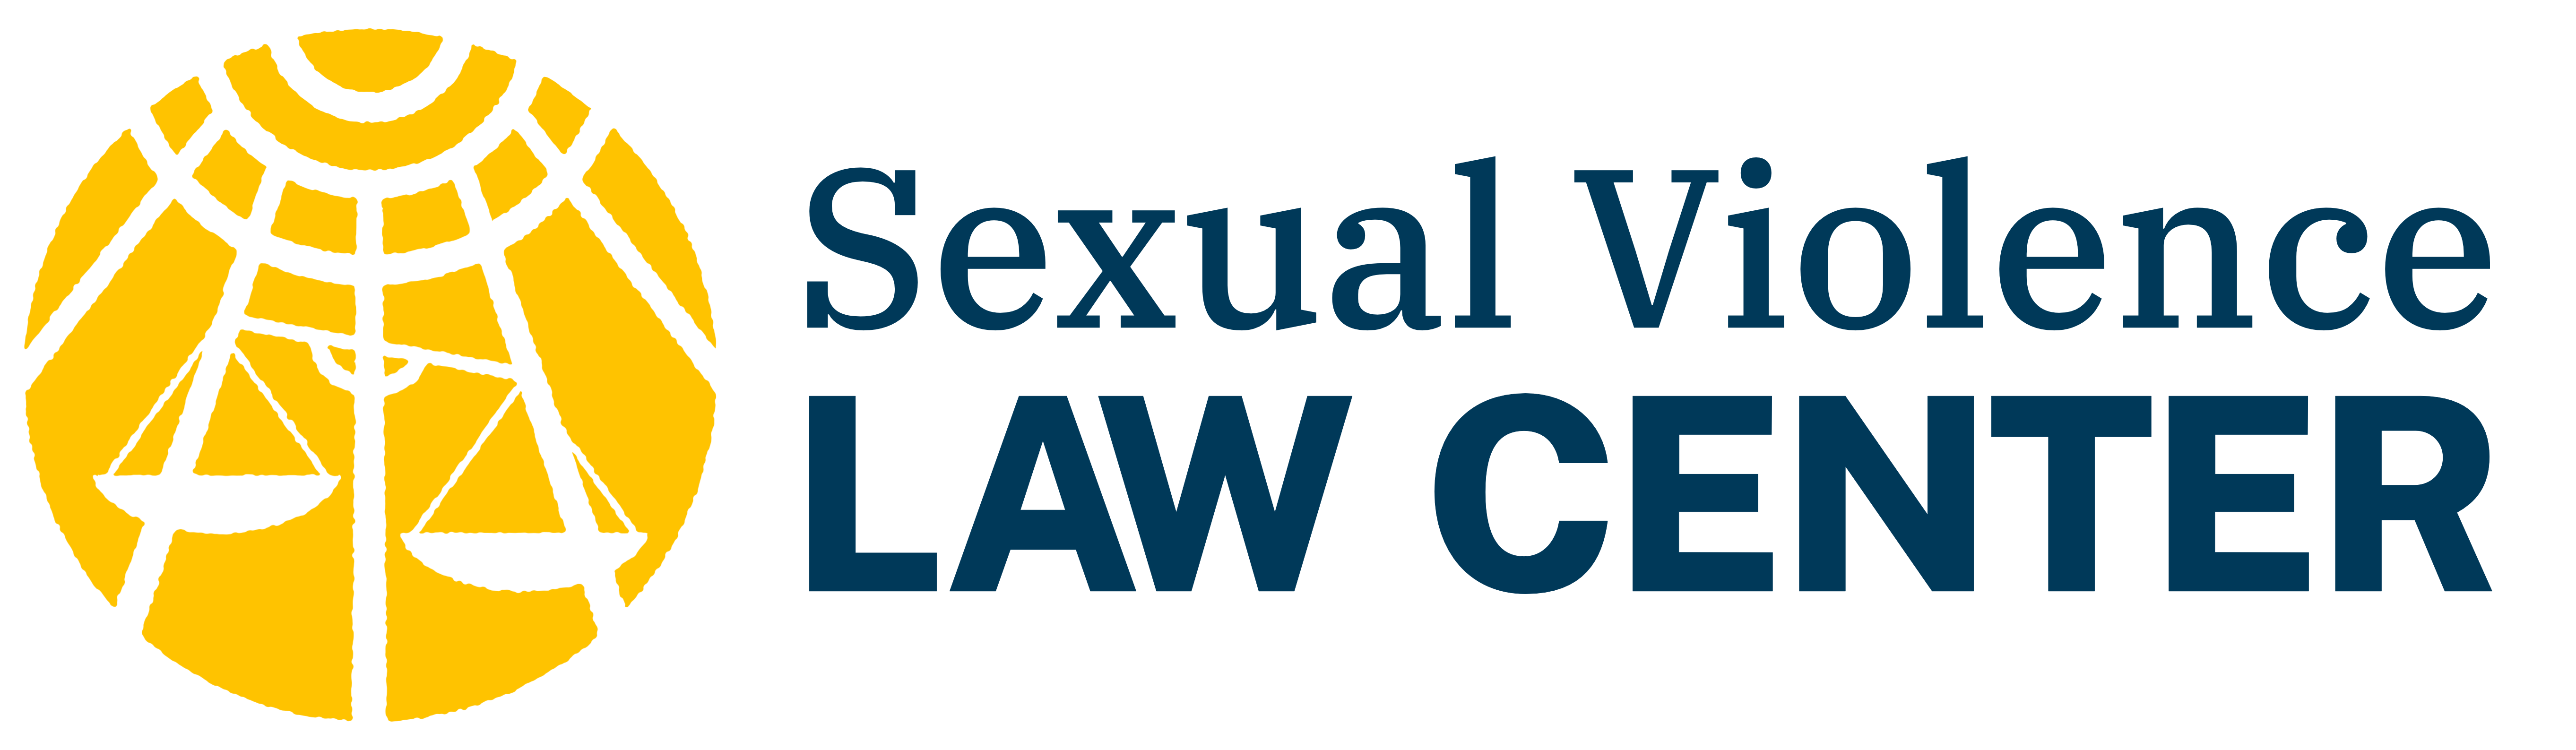 Sexual Violence Law Center